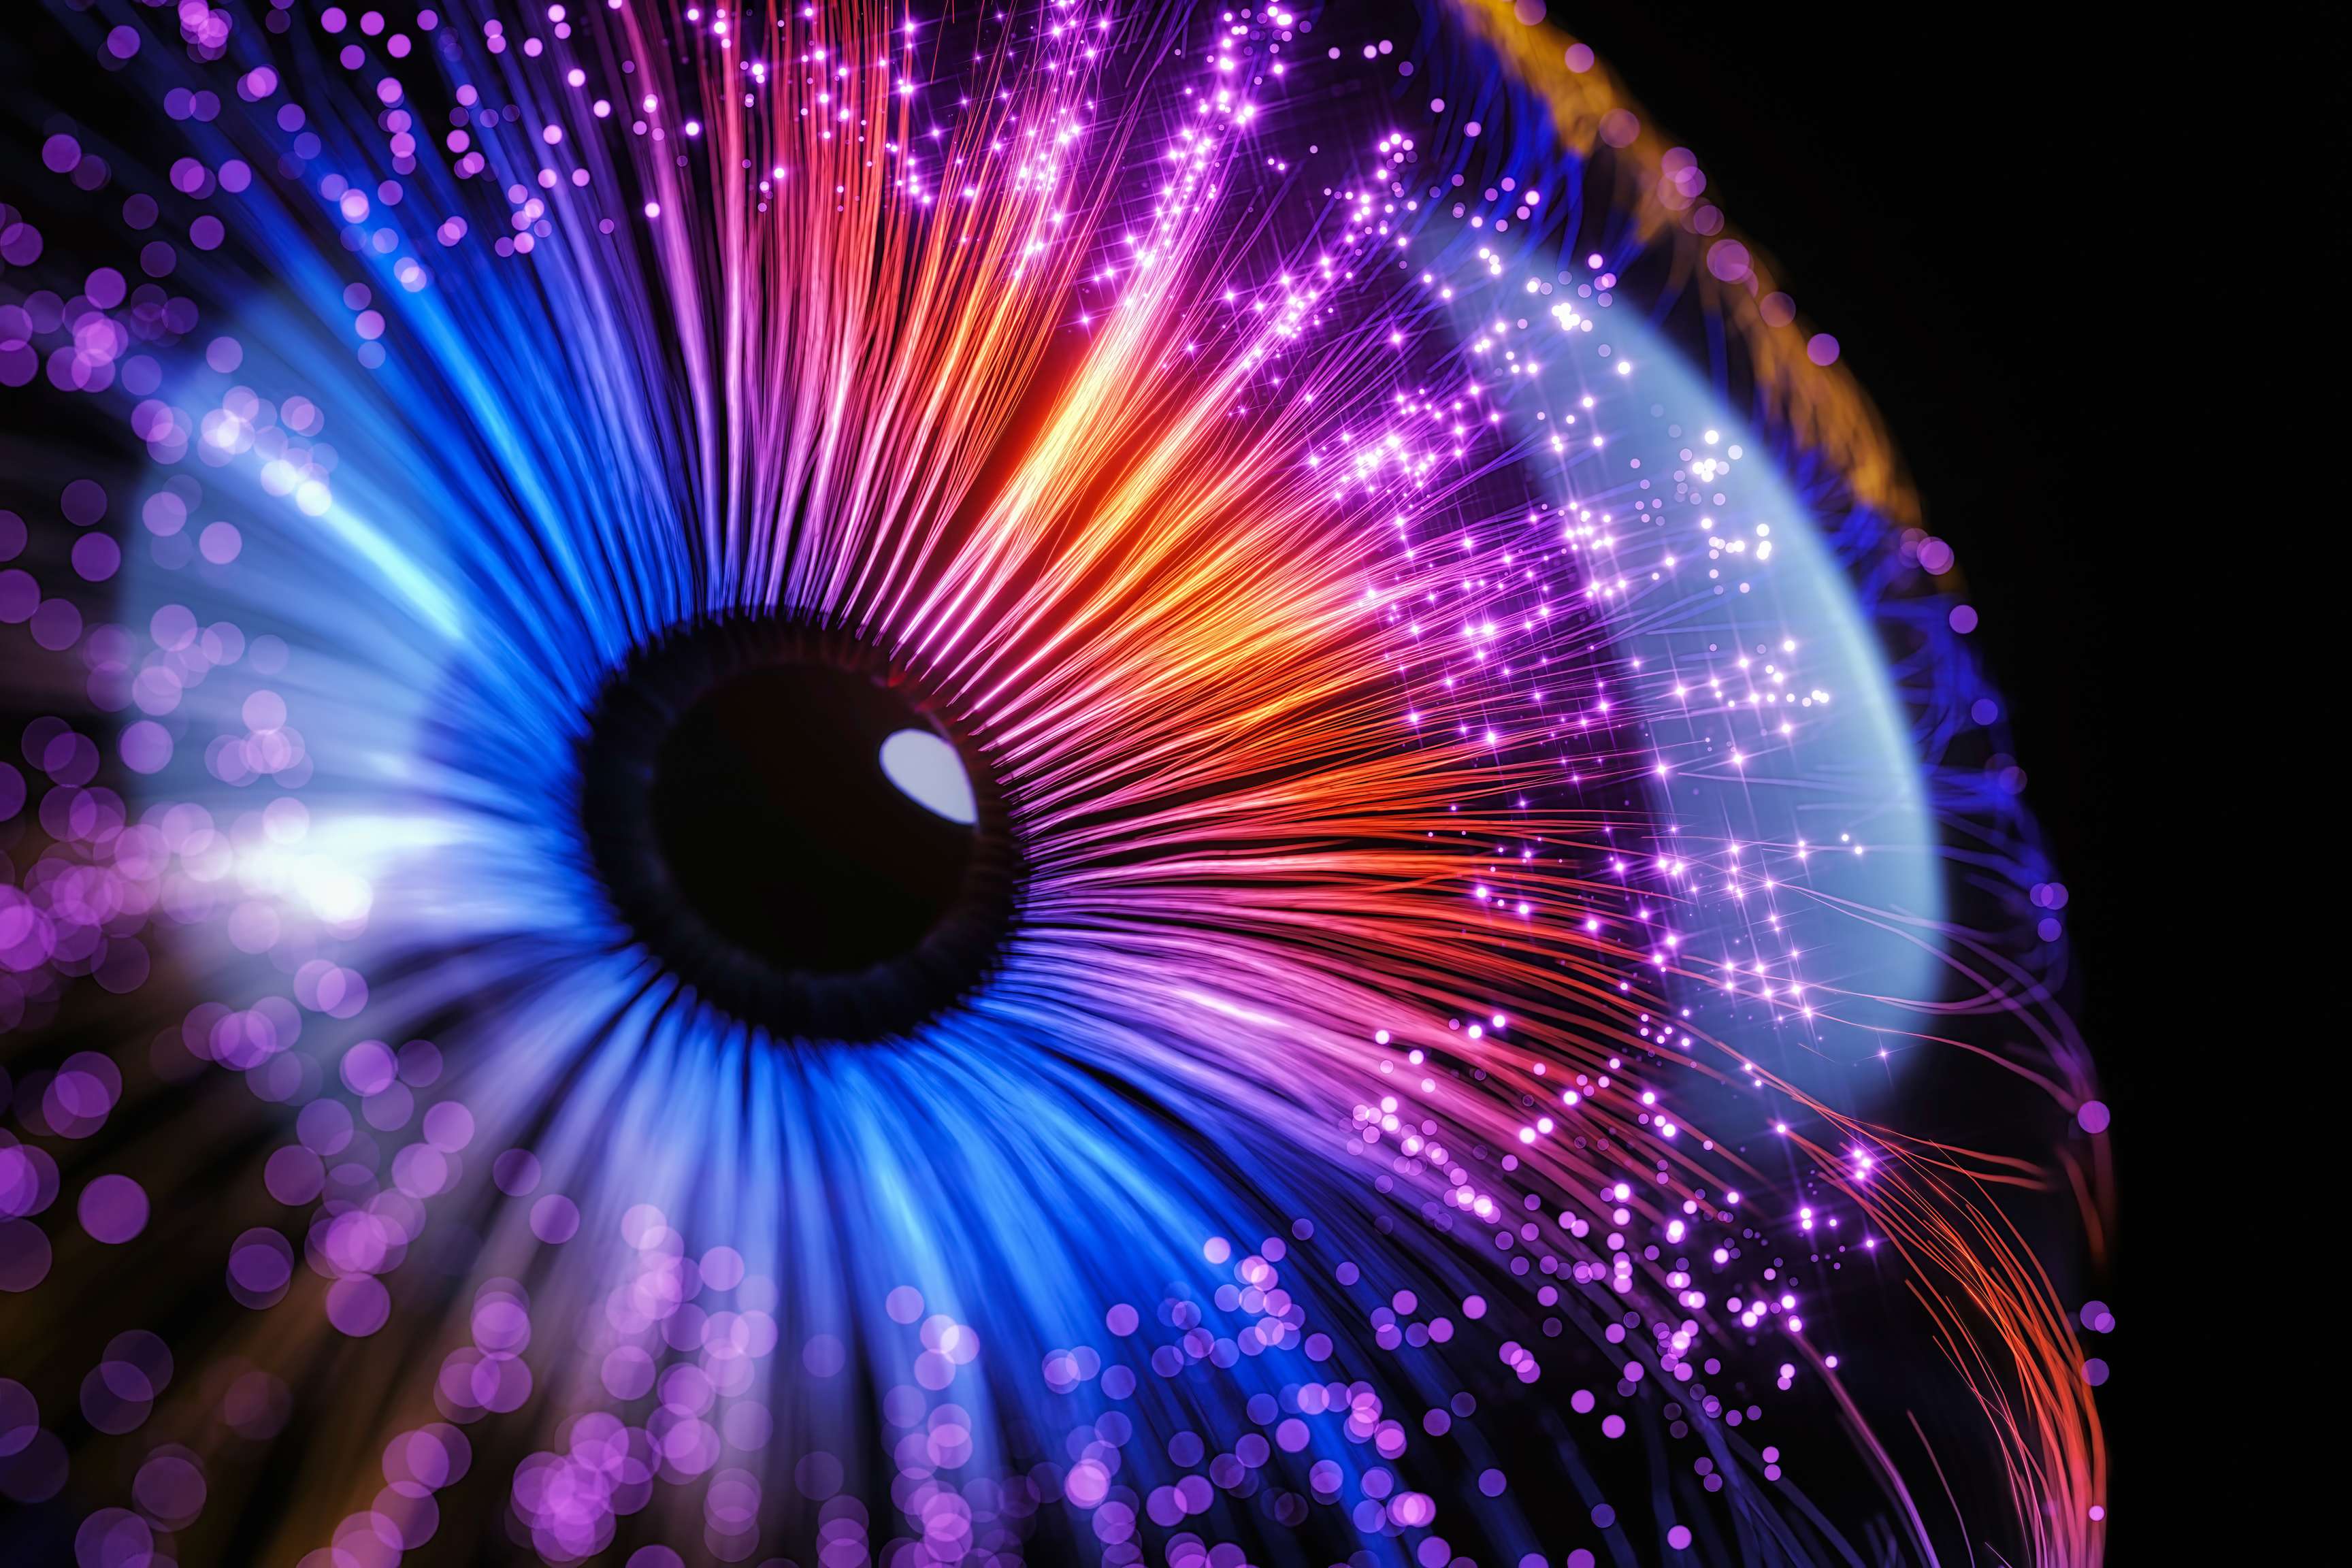 Abstract image that resembles an eye to whose black pupil lead colorful threads.